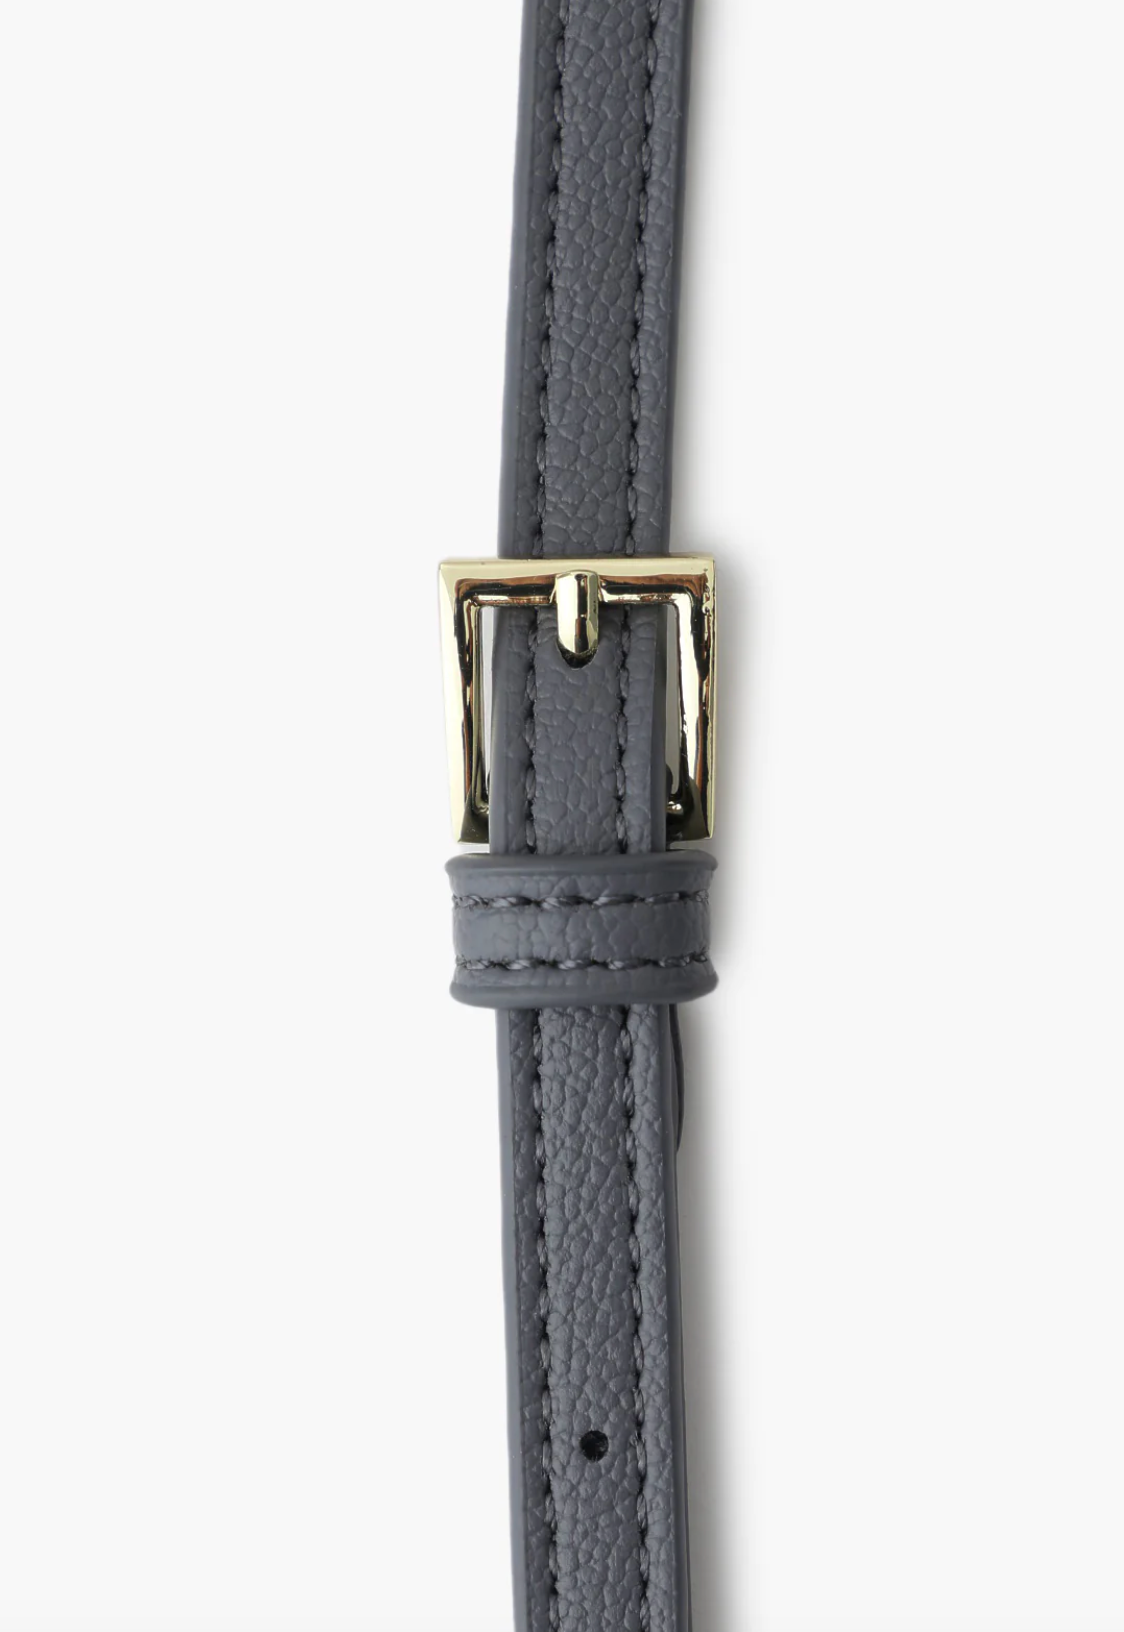 The strap to this grey crossbody bag is with a golden metal buckle for adjustment